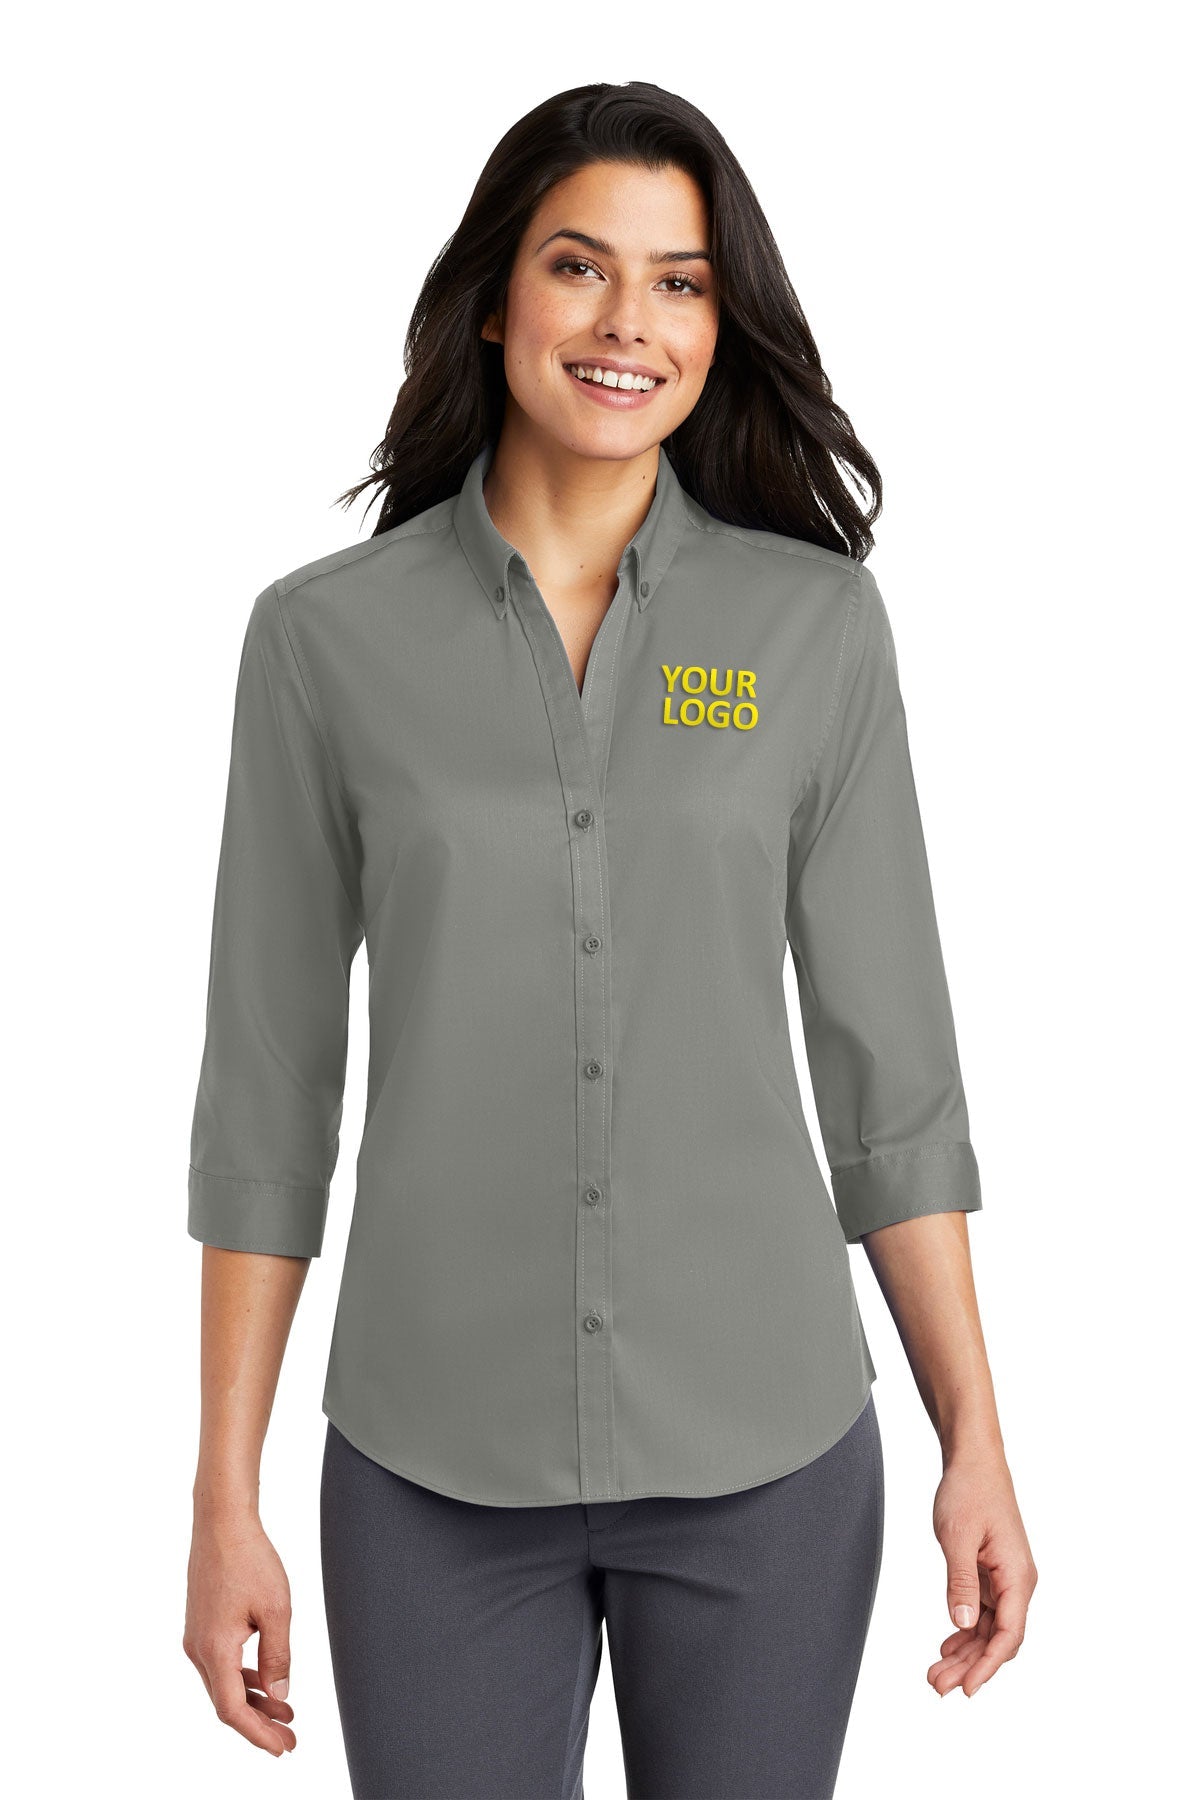 Port Authority Monument Grey L665 work shirts with logo